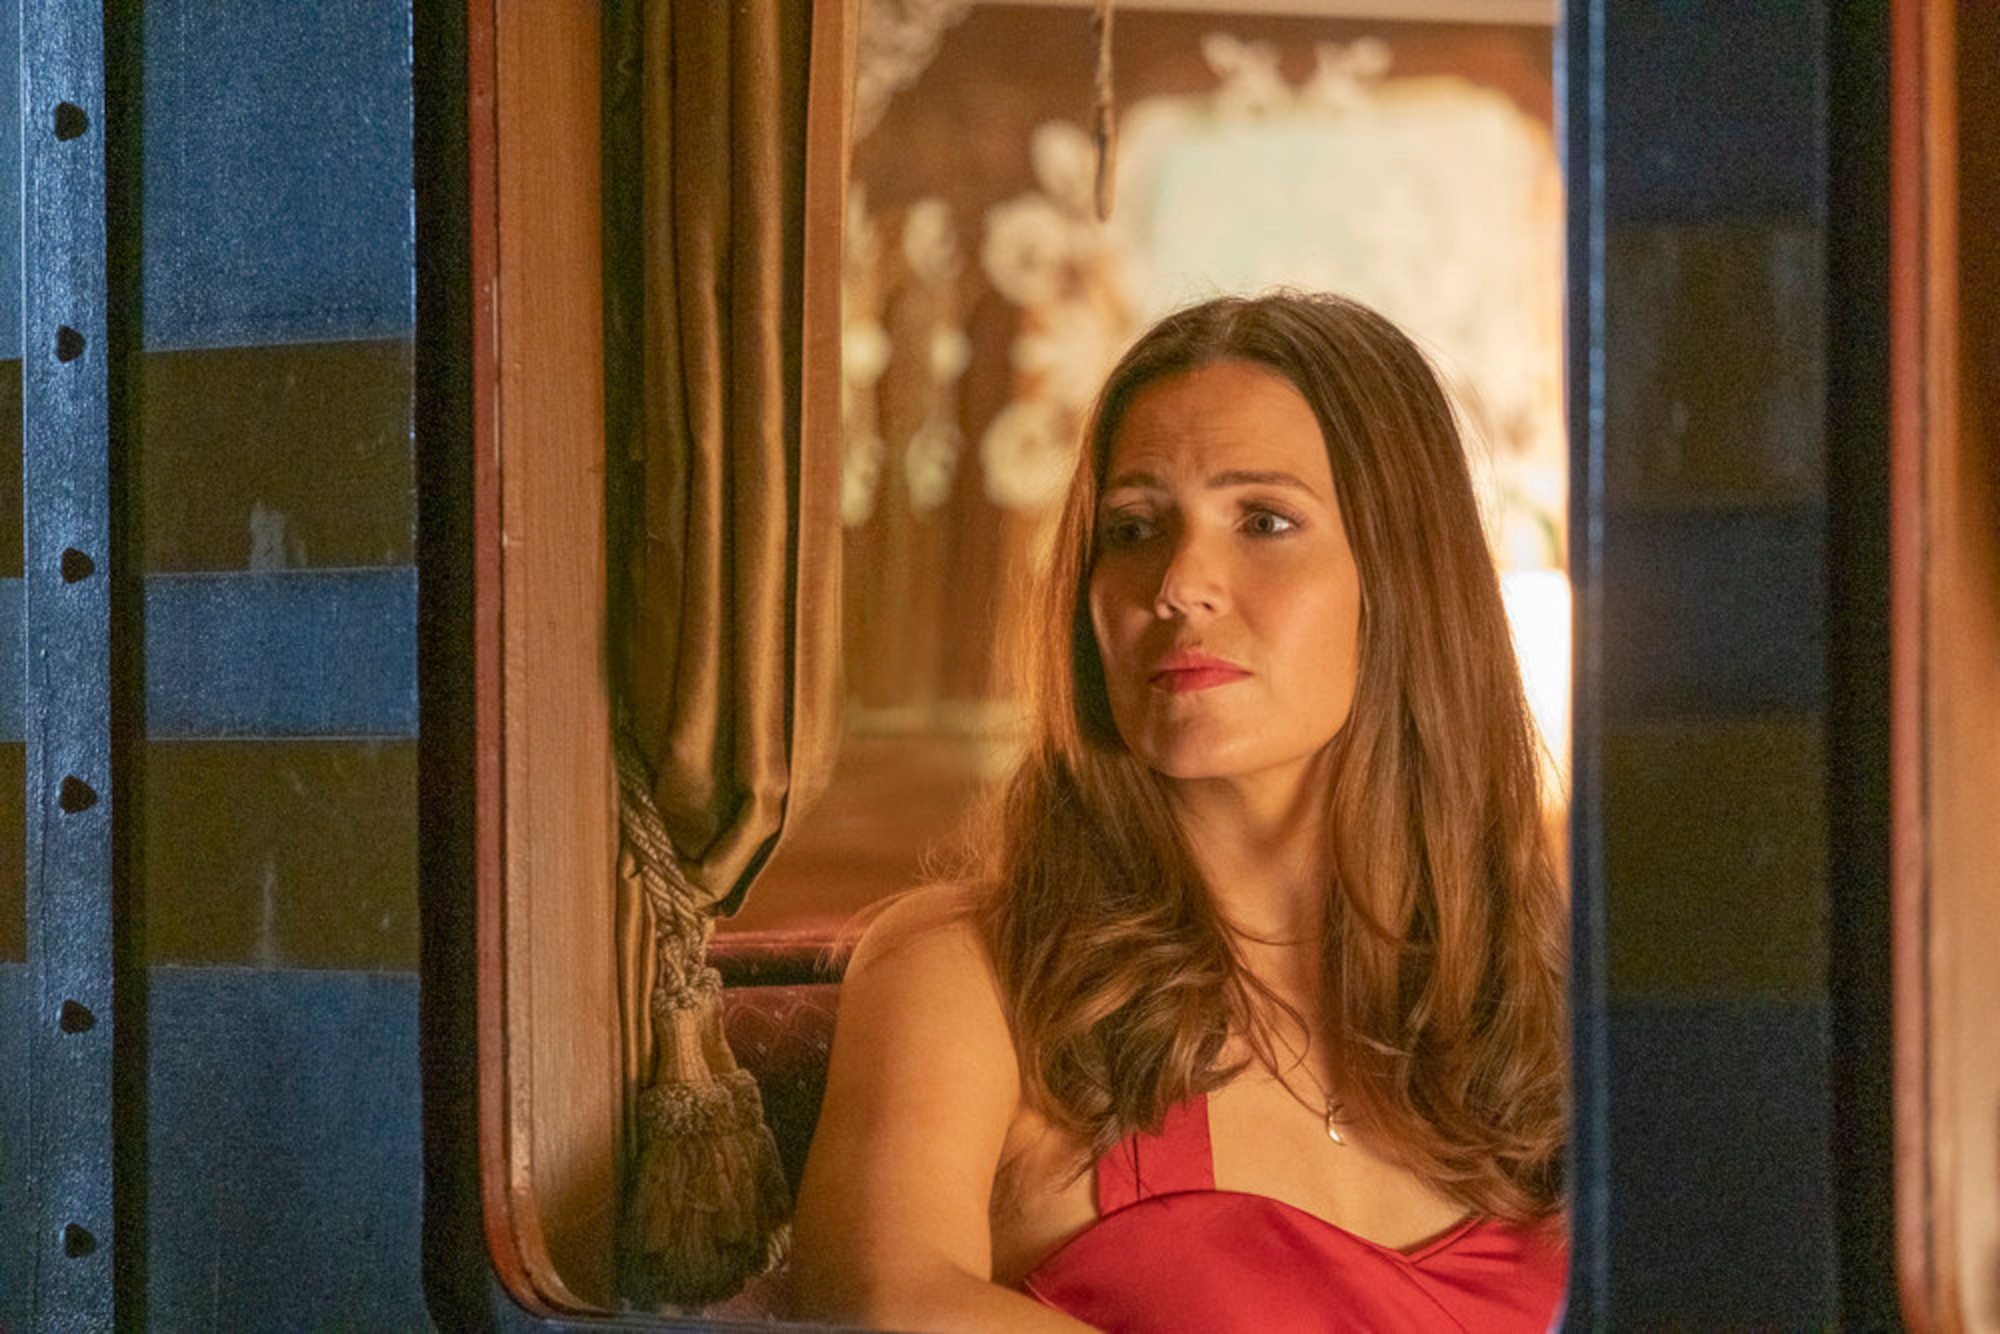 Mandy Moore as Rebecca Pearson in 'This Is Us' Season 6 Episode 17. Her funeral will take place in 'This Is Us' Season 6 Episode 18. She's on a train here, wearing a red dress.